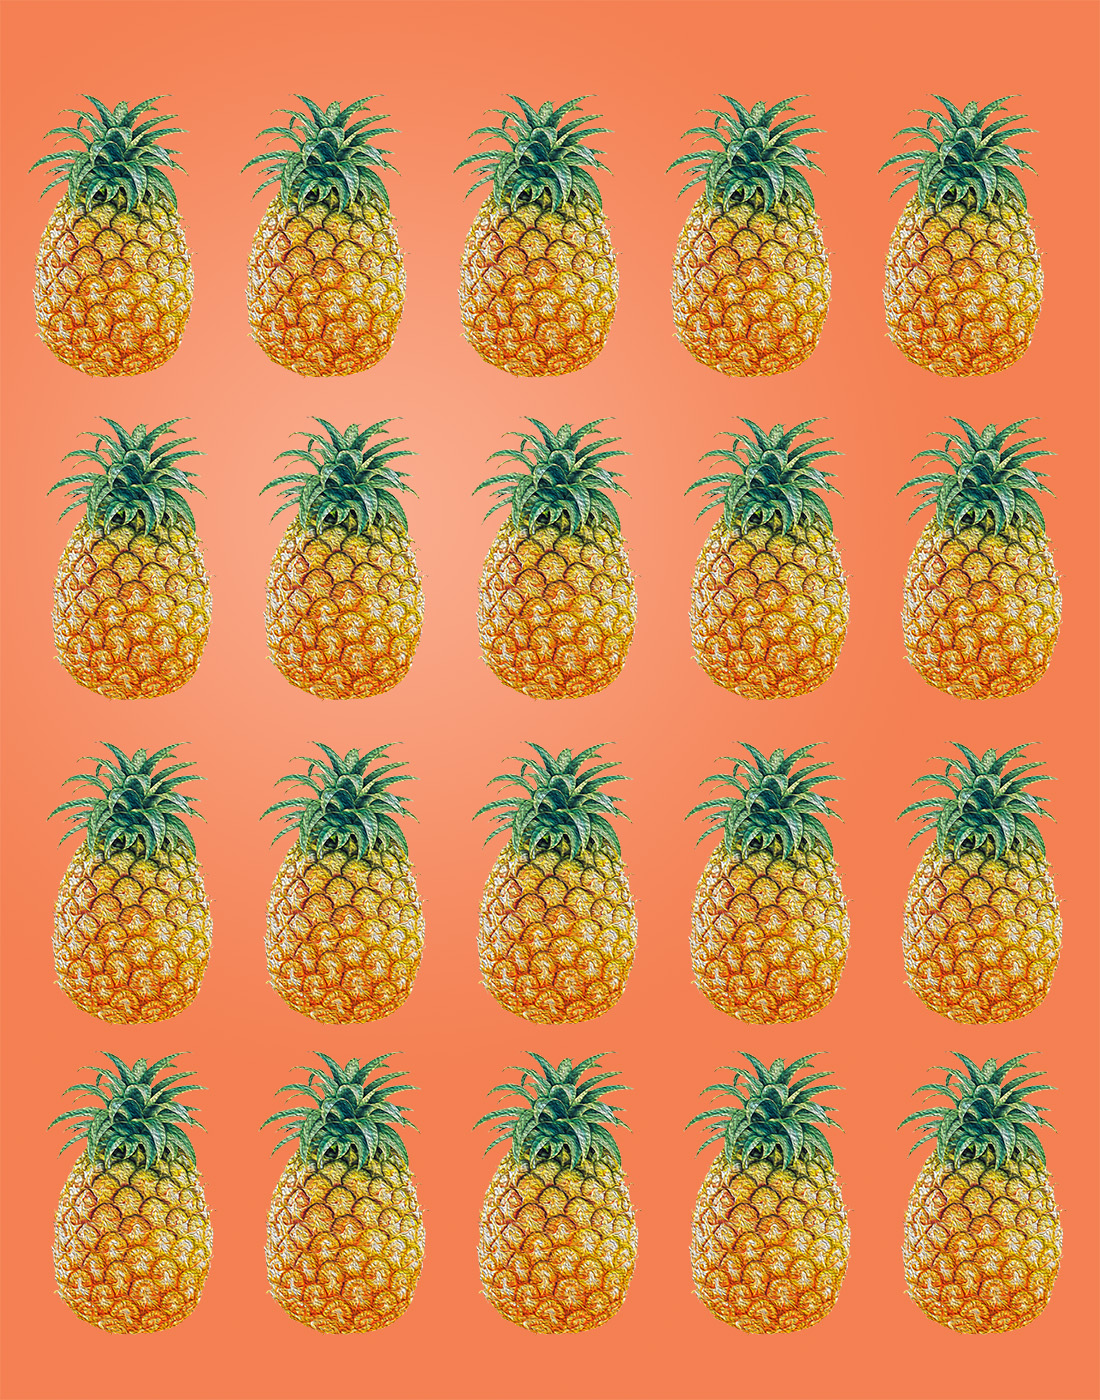 Related searches for Pineapple Wallpaper